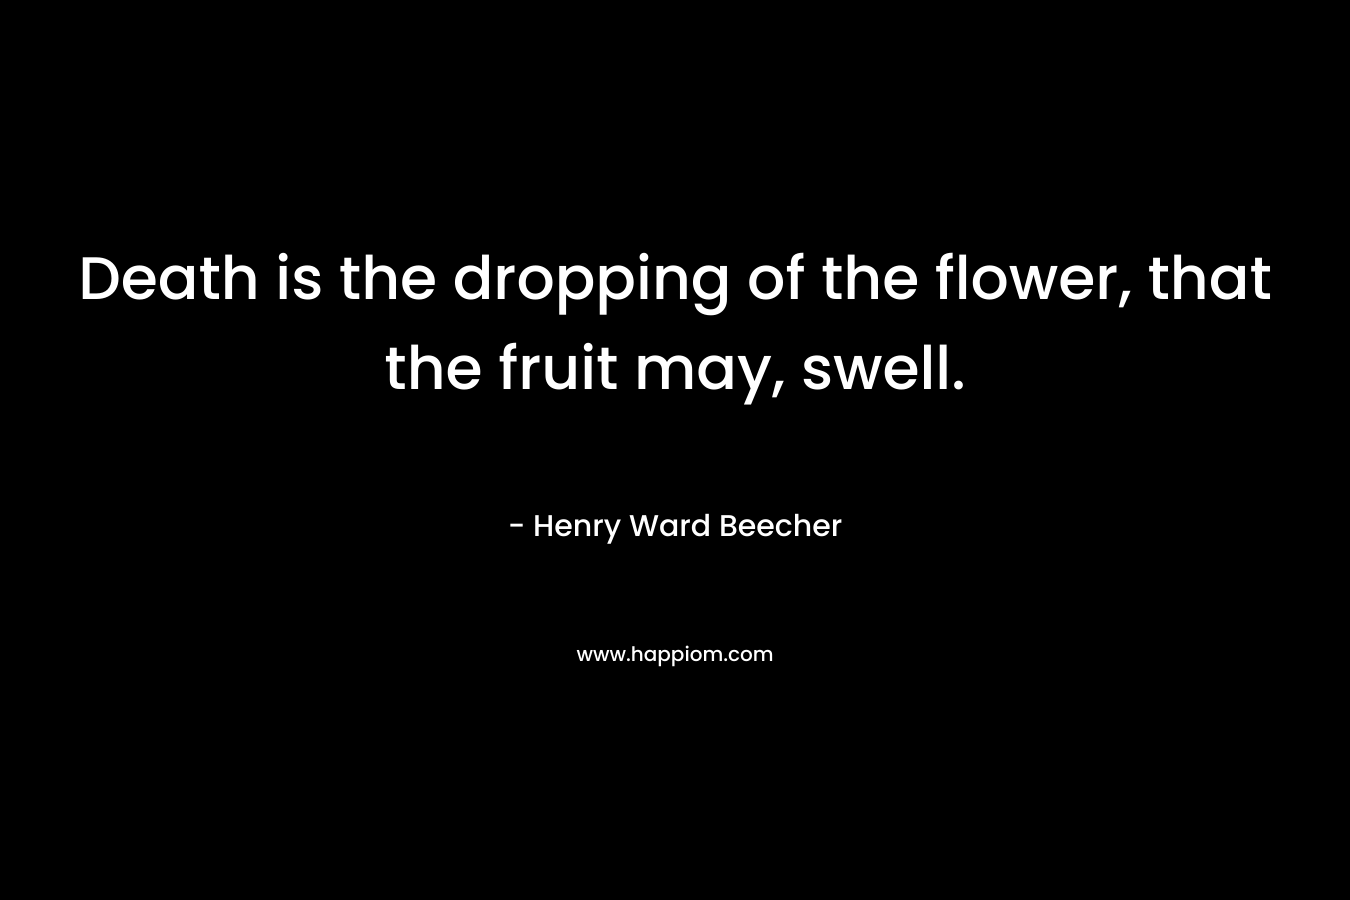 Death is the dropping of the flower, that the fruit may, swell.